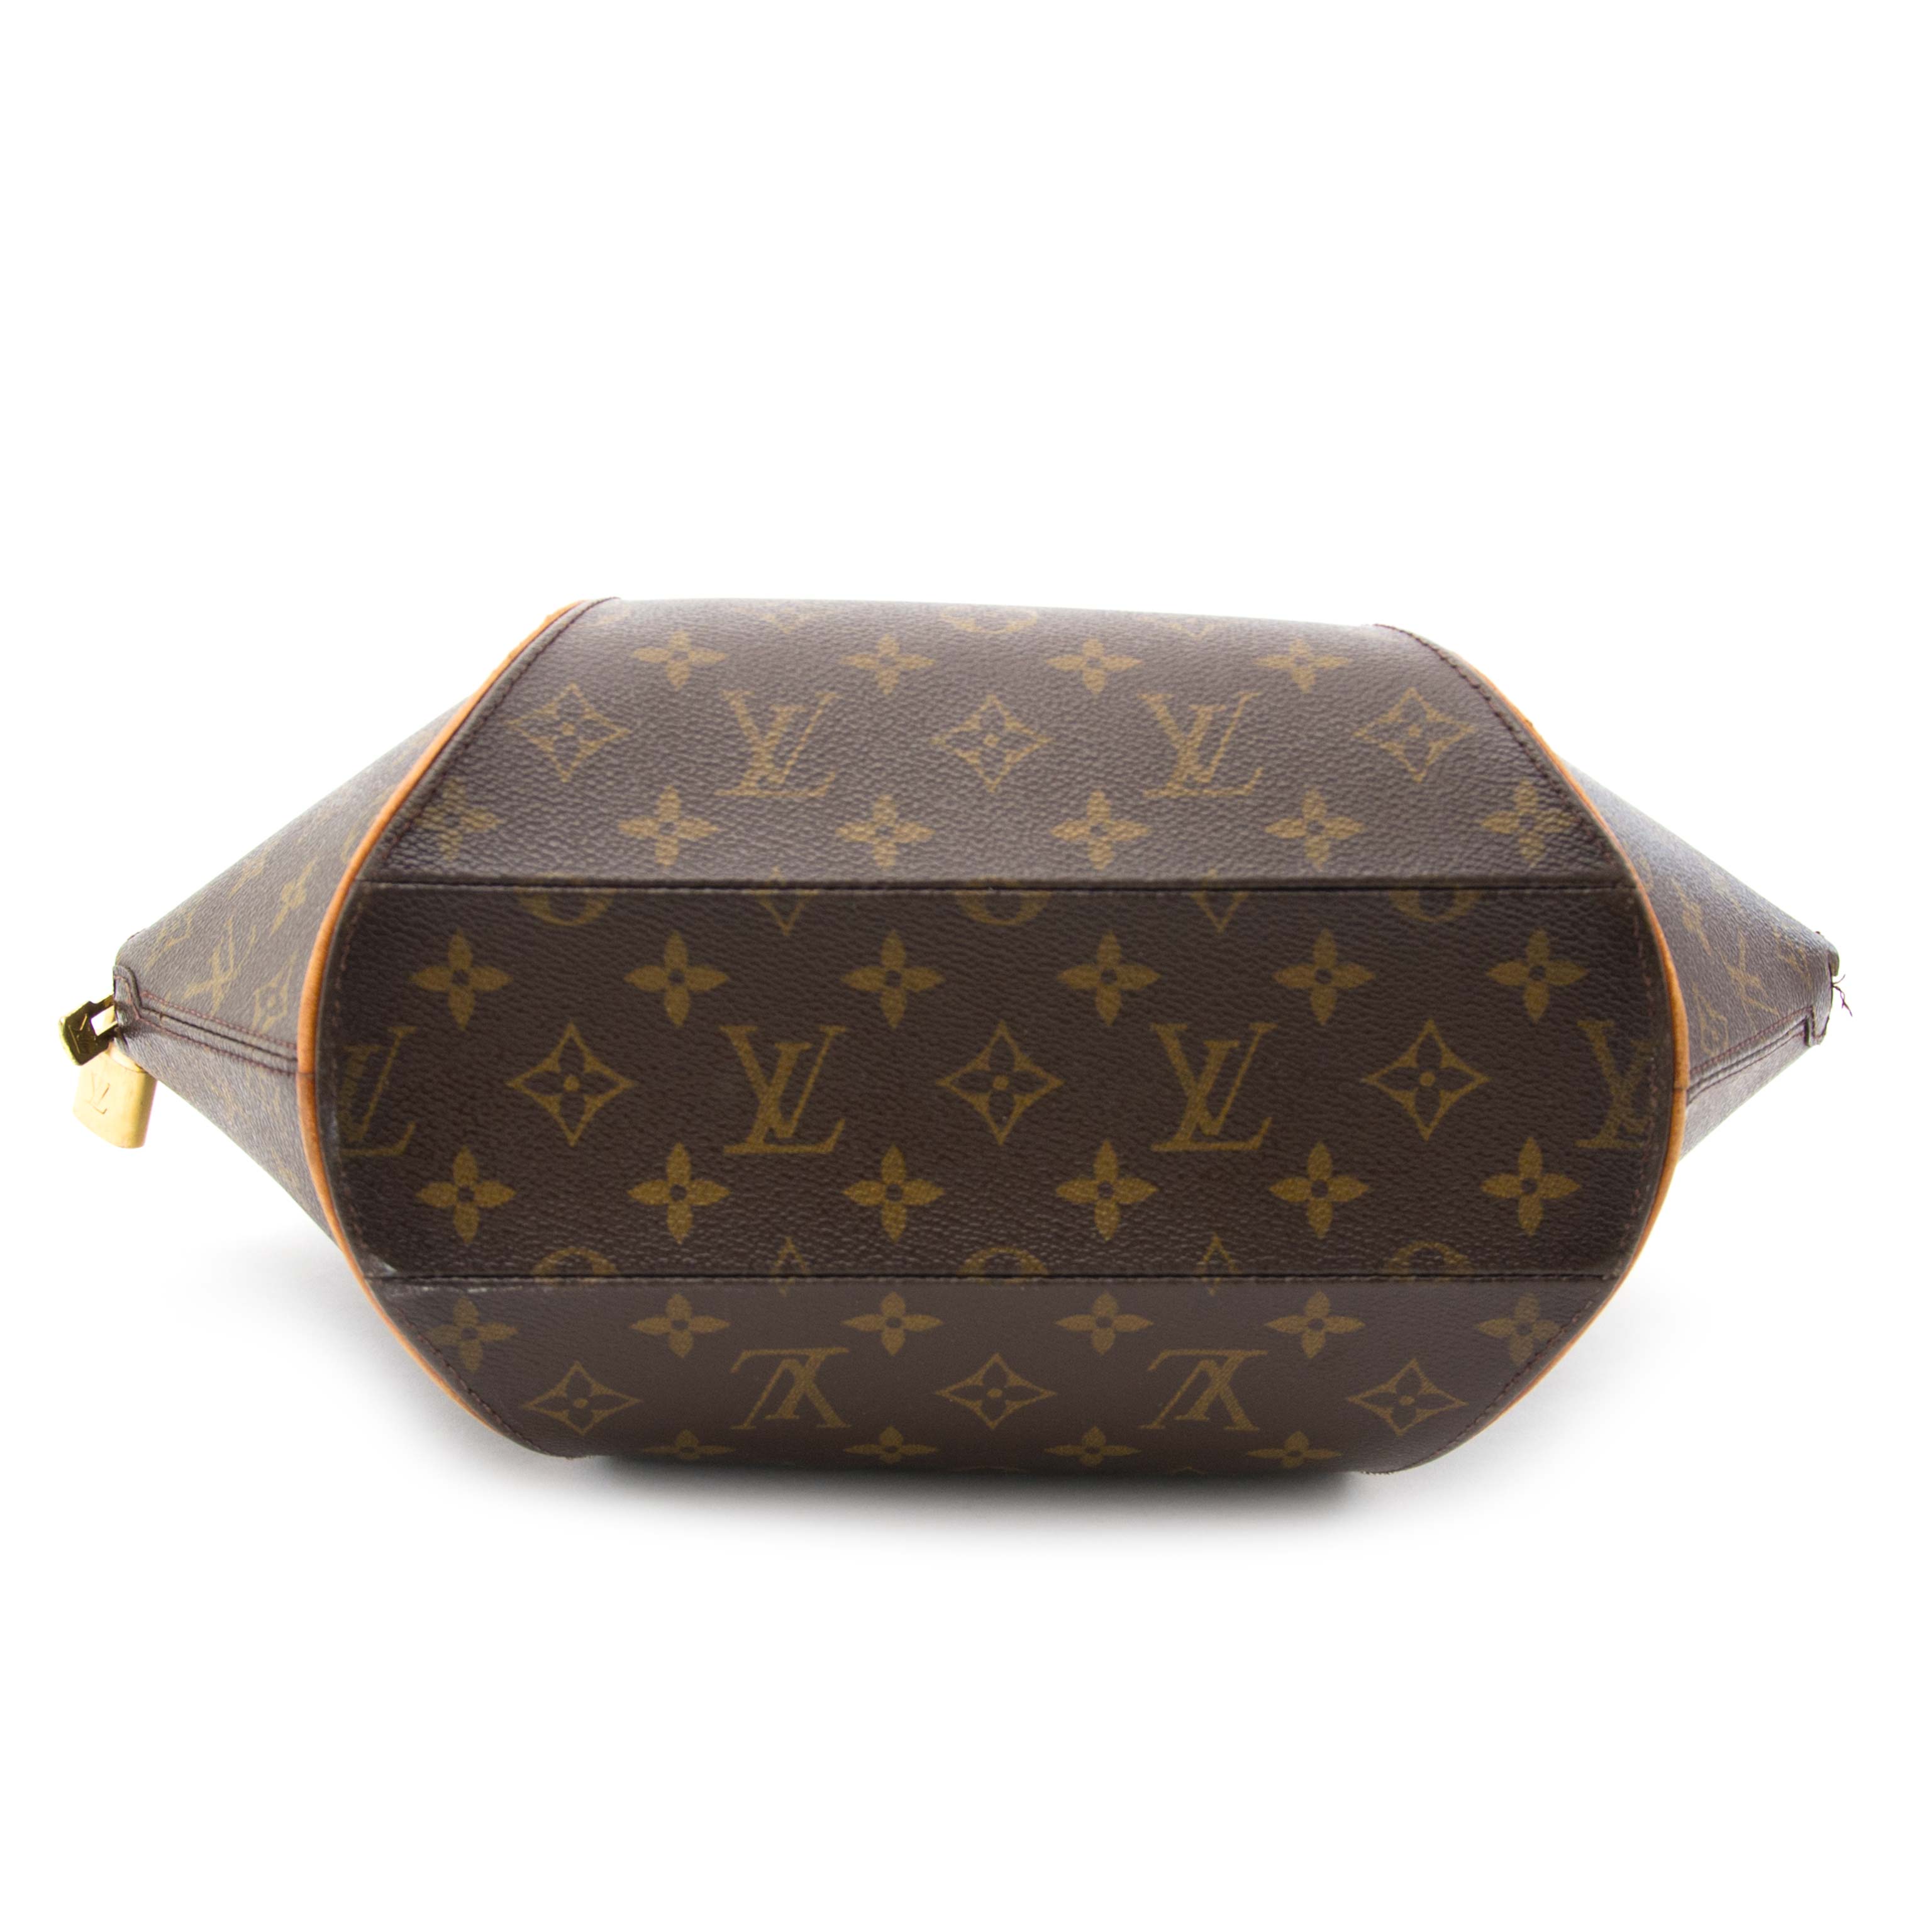 Buy Free Shipping [Bag] LOUIS VUITTON Louis Vuitton Eclipse Shiny Monogram  Rainbow Bijou Sack Square Pouch Accessory MP2467 from Japan - Buy authentic  Plus exclusive items from Japan